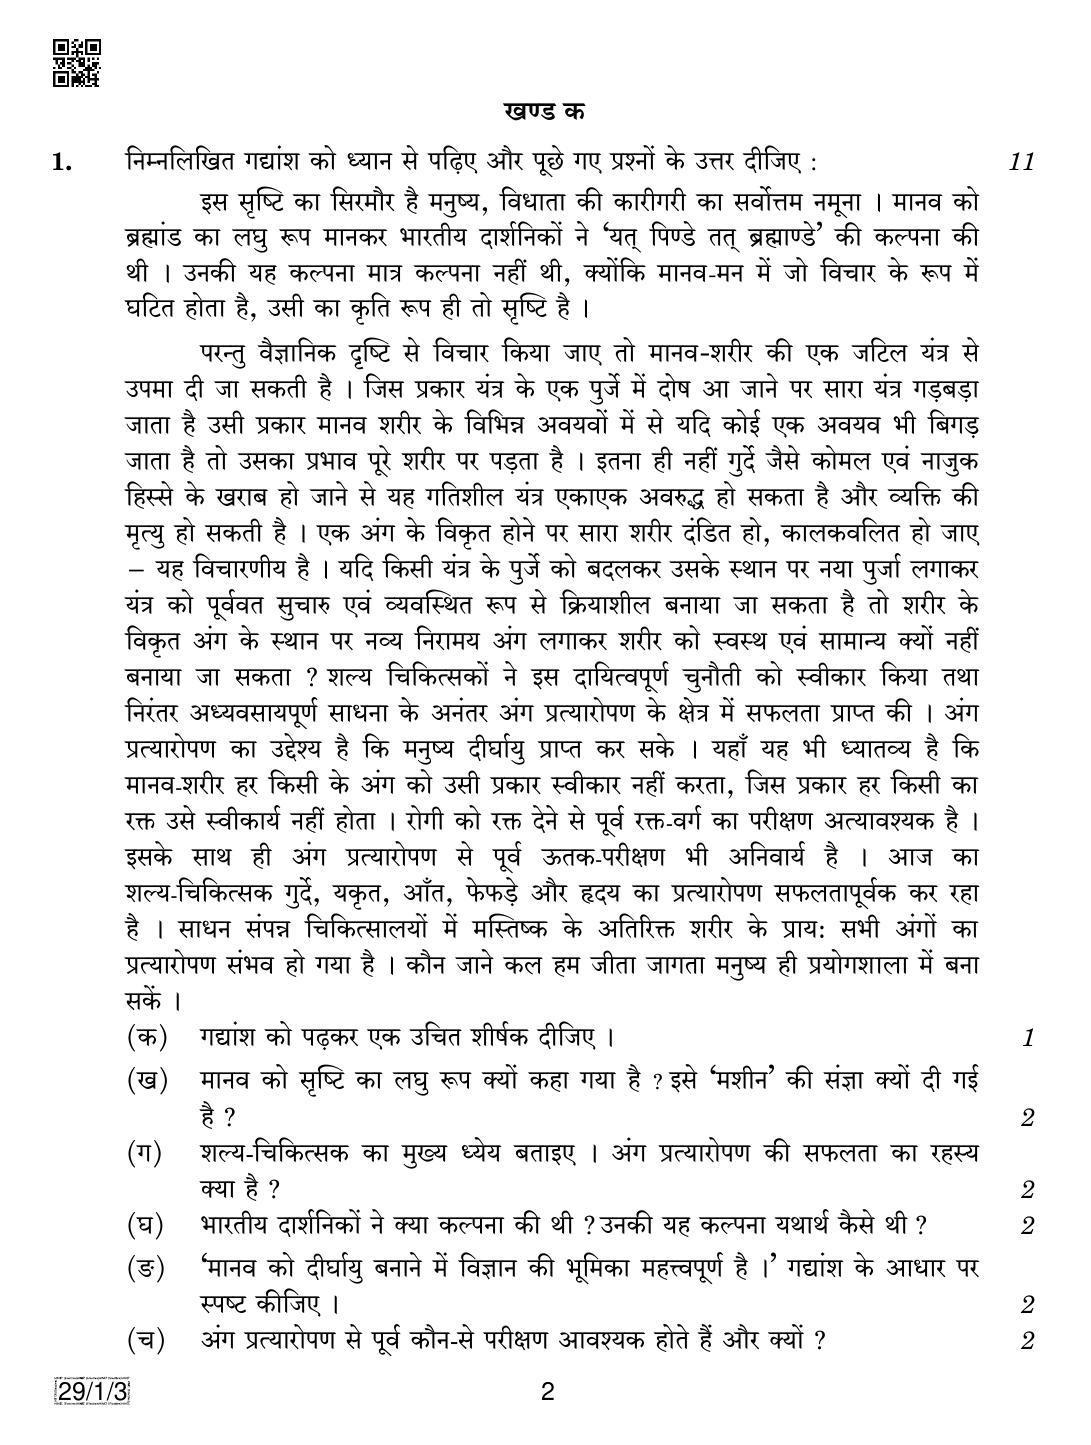 CBSE Class 12 29-1-3 HINDI ELECTIVE 2019 Compartment Question Paper - Page 2